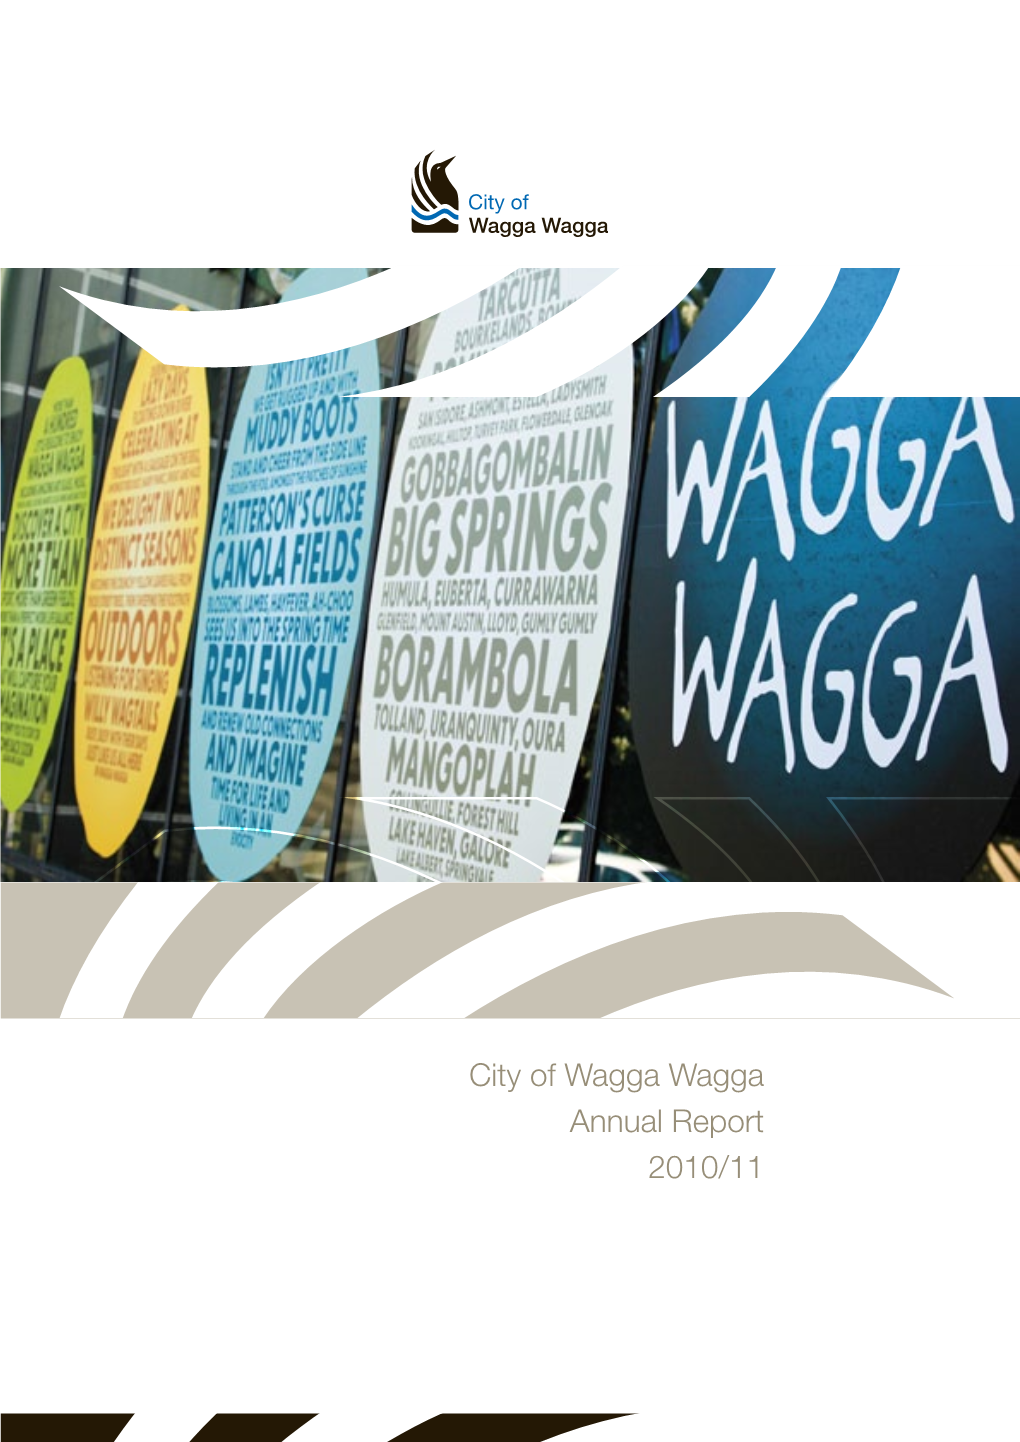 City of Wagga Wagga Annual Report 2010/11 Statement of Commitment to Aboriginal Australians